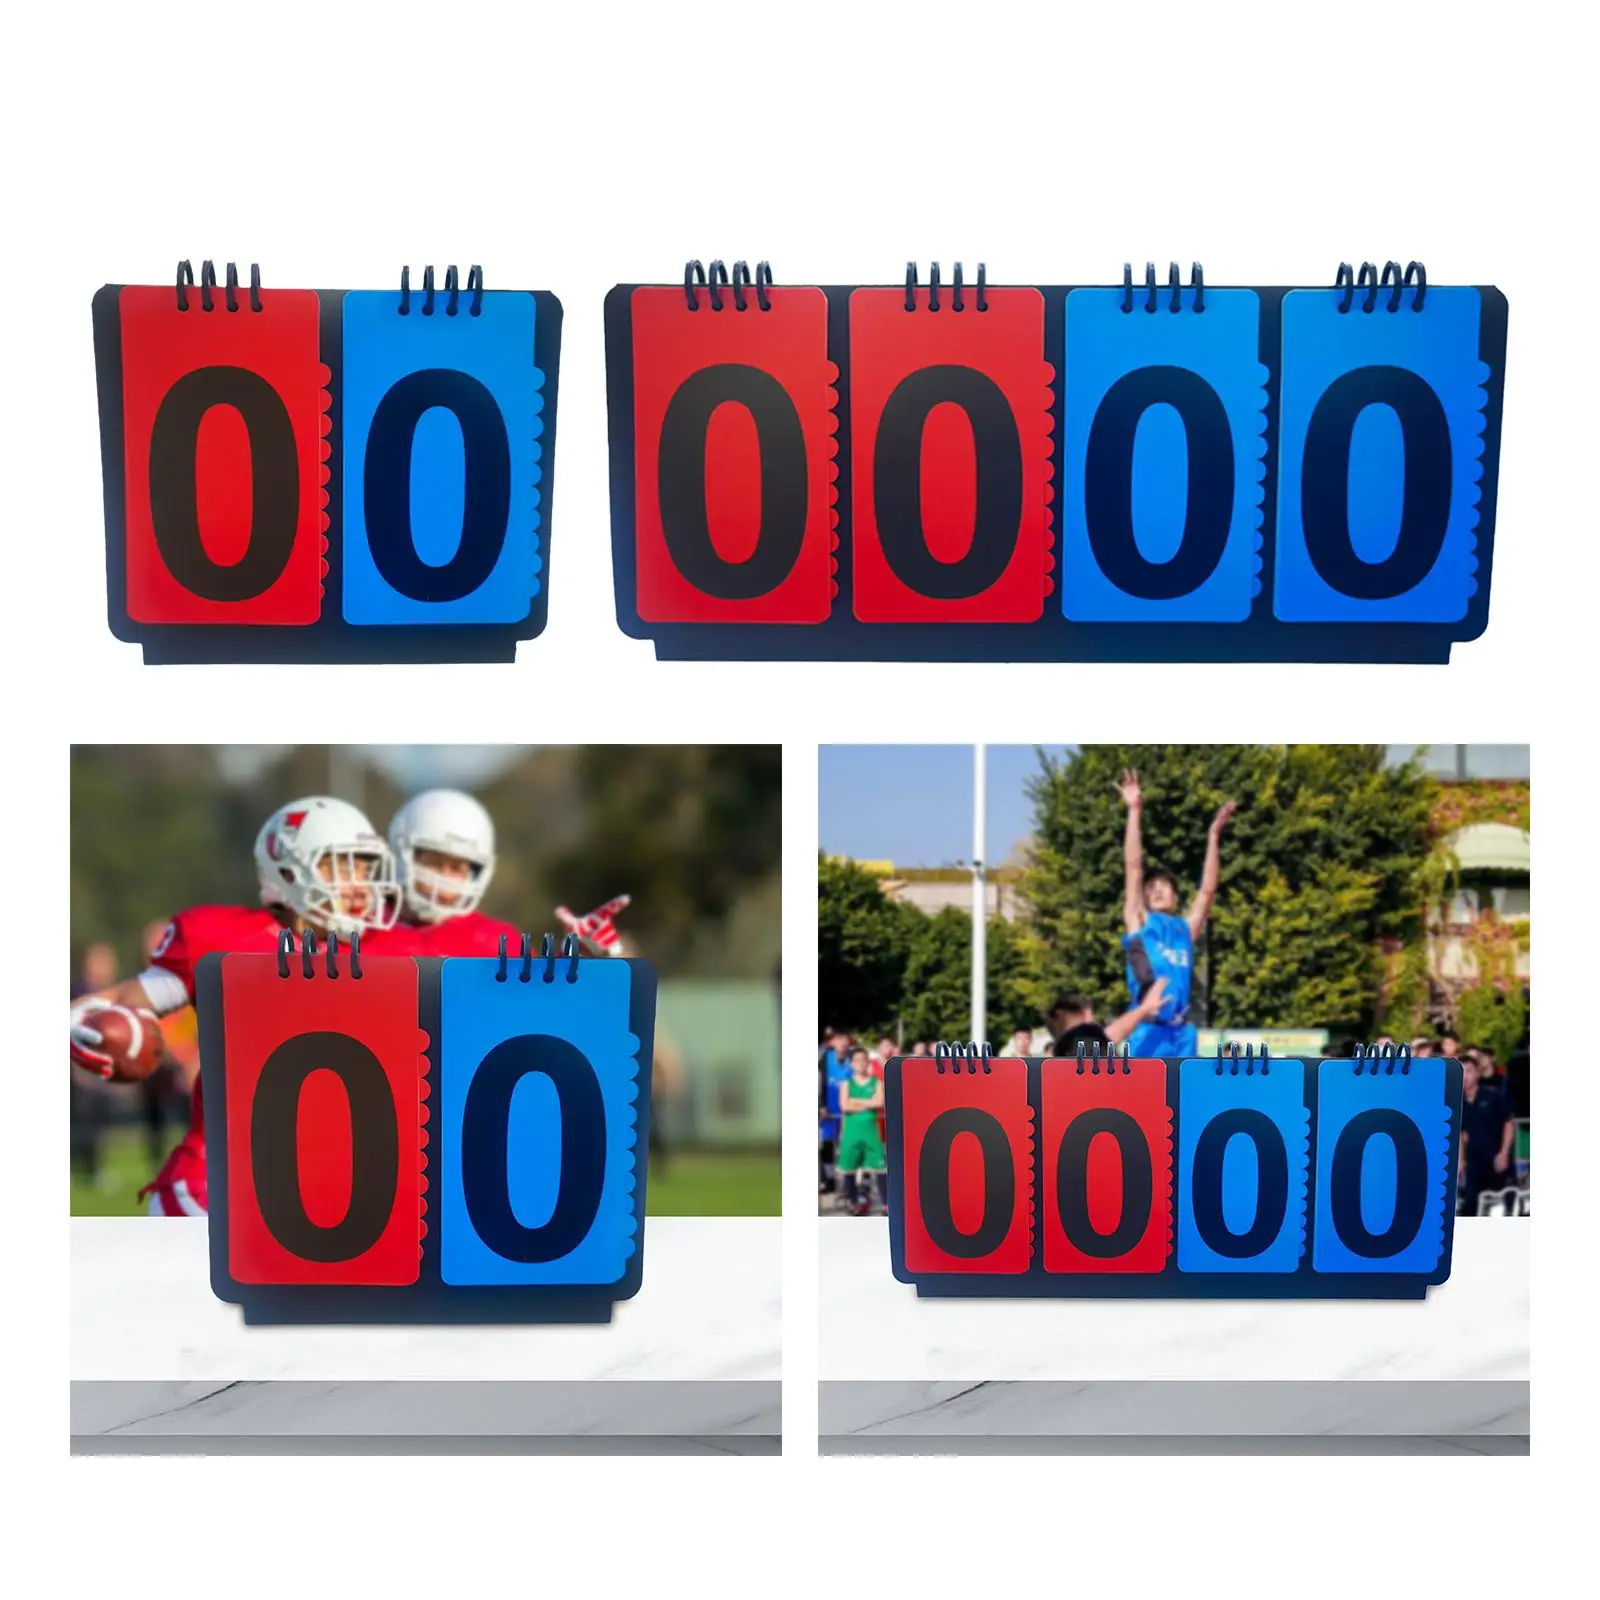 Table Score Flippers Flip Number Score Board for Games Basketball Volleyball